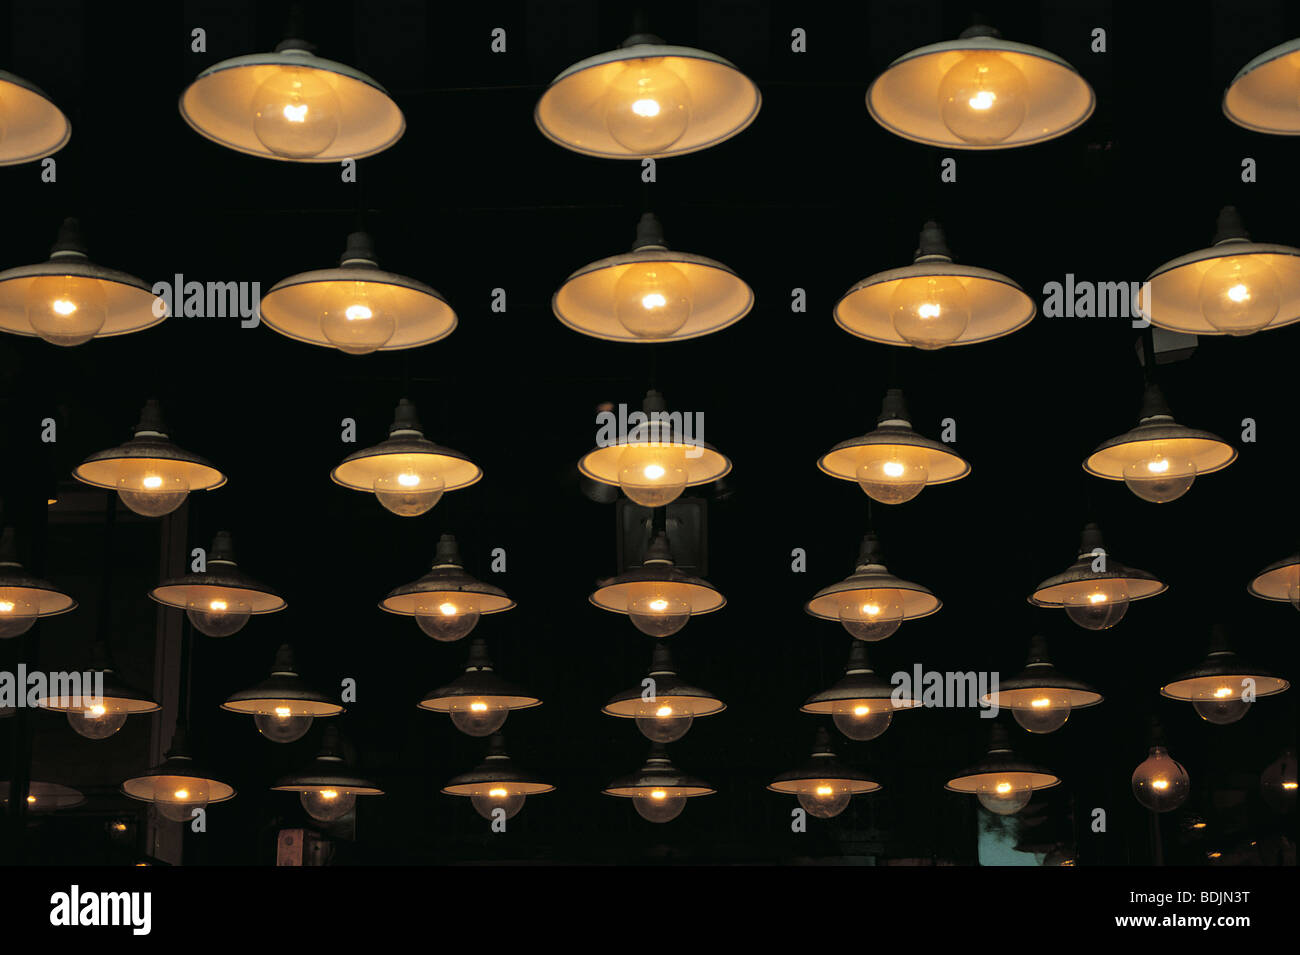 An array of identical electric lights that look like alien flying saucers against black celiing Stock Photo